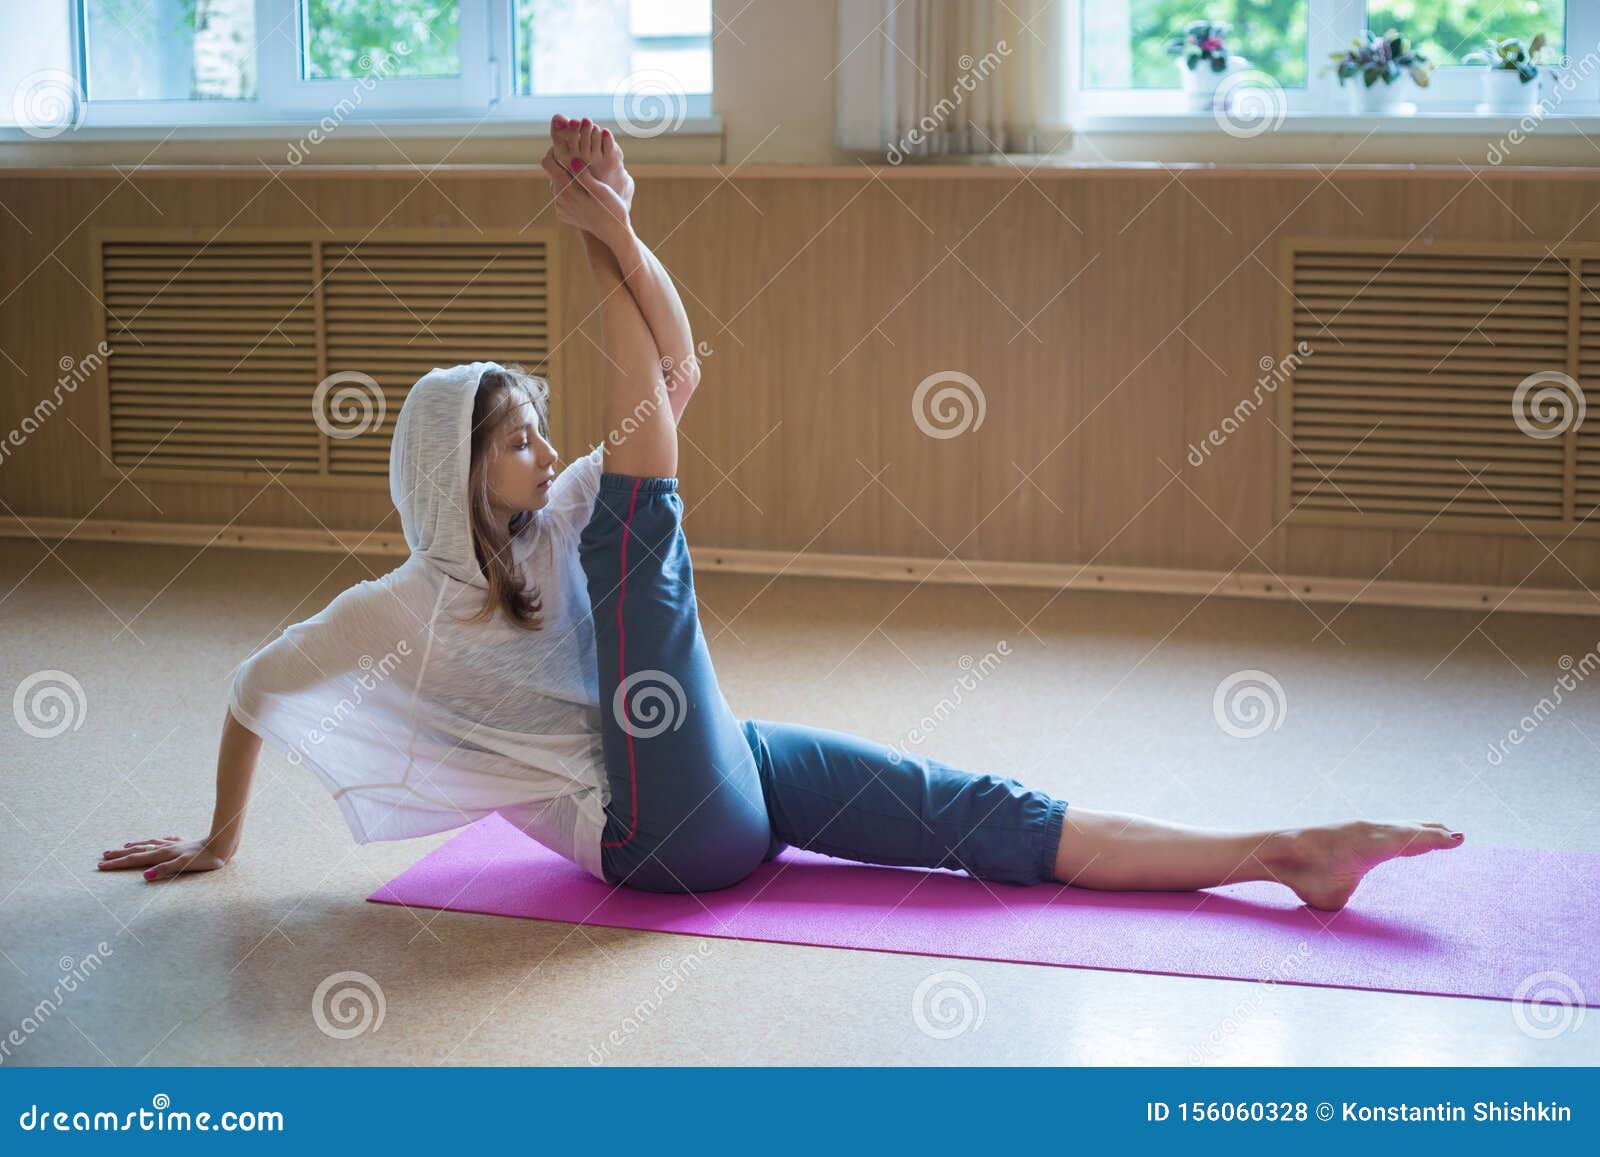 Young Slim Woman in the White Hood Sitting on the Yoga Mat with